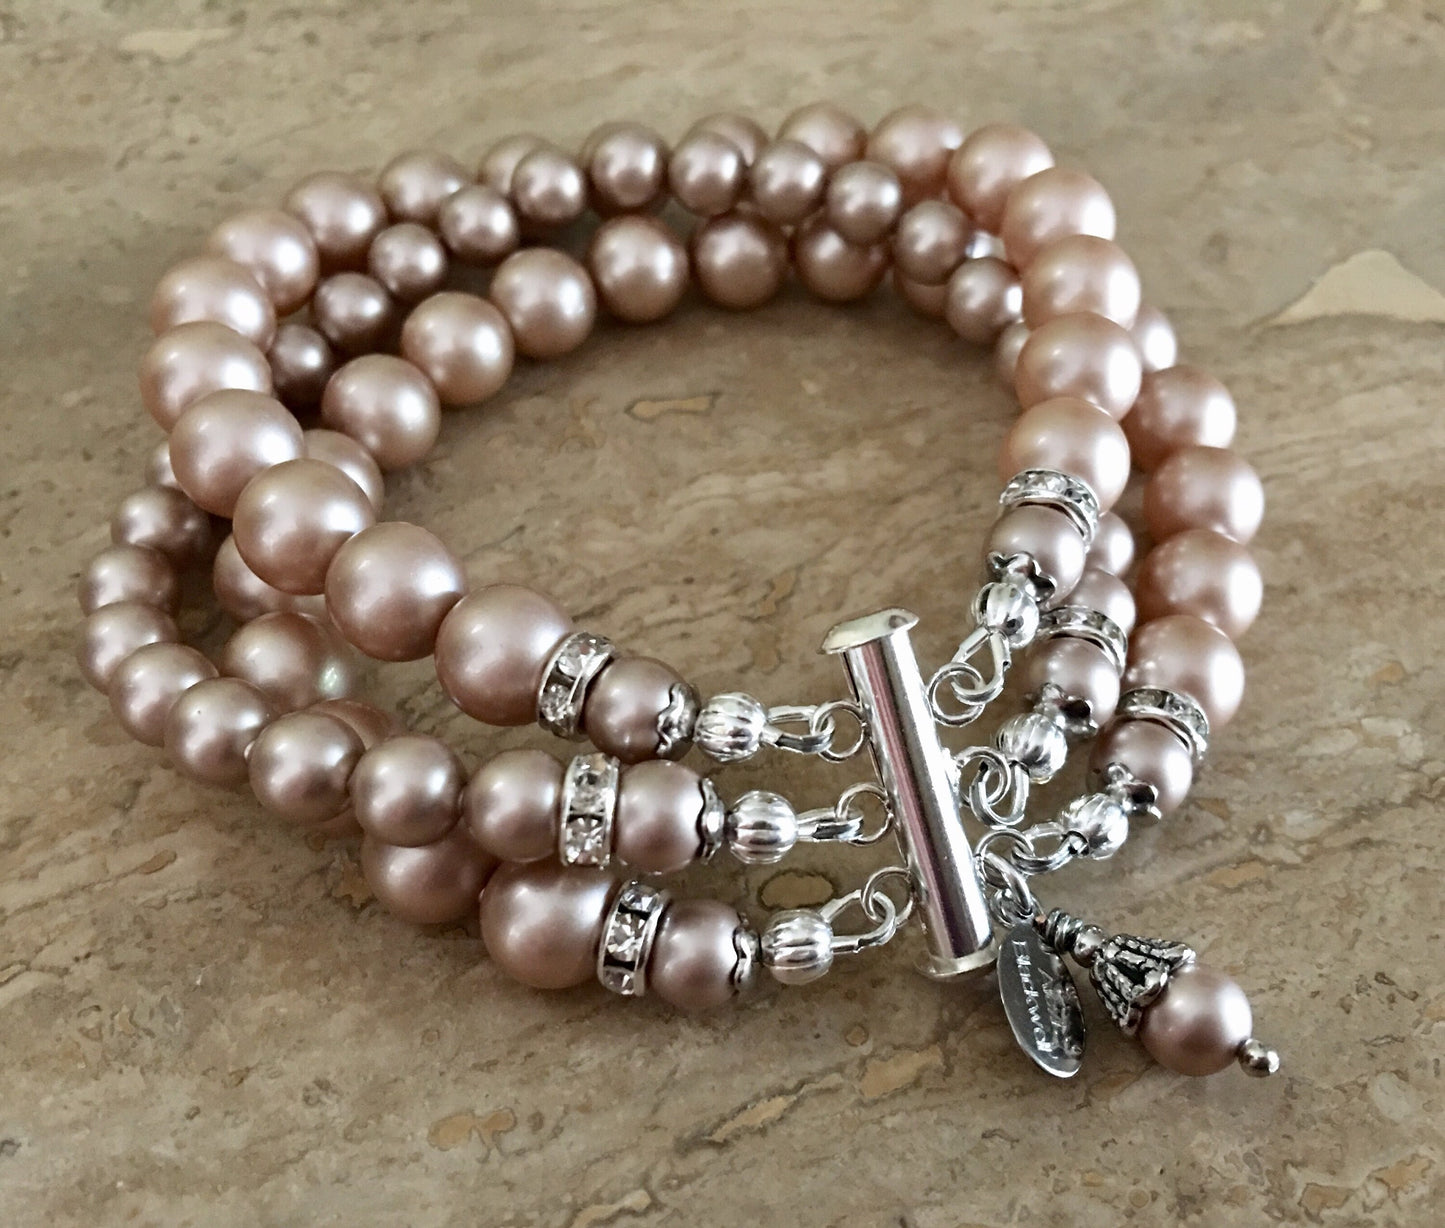 Taupe Bracelet Earrings Set in 3 strands Powder Almond or your choice of color crystal Pearls Earrings included